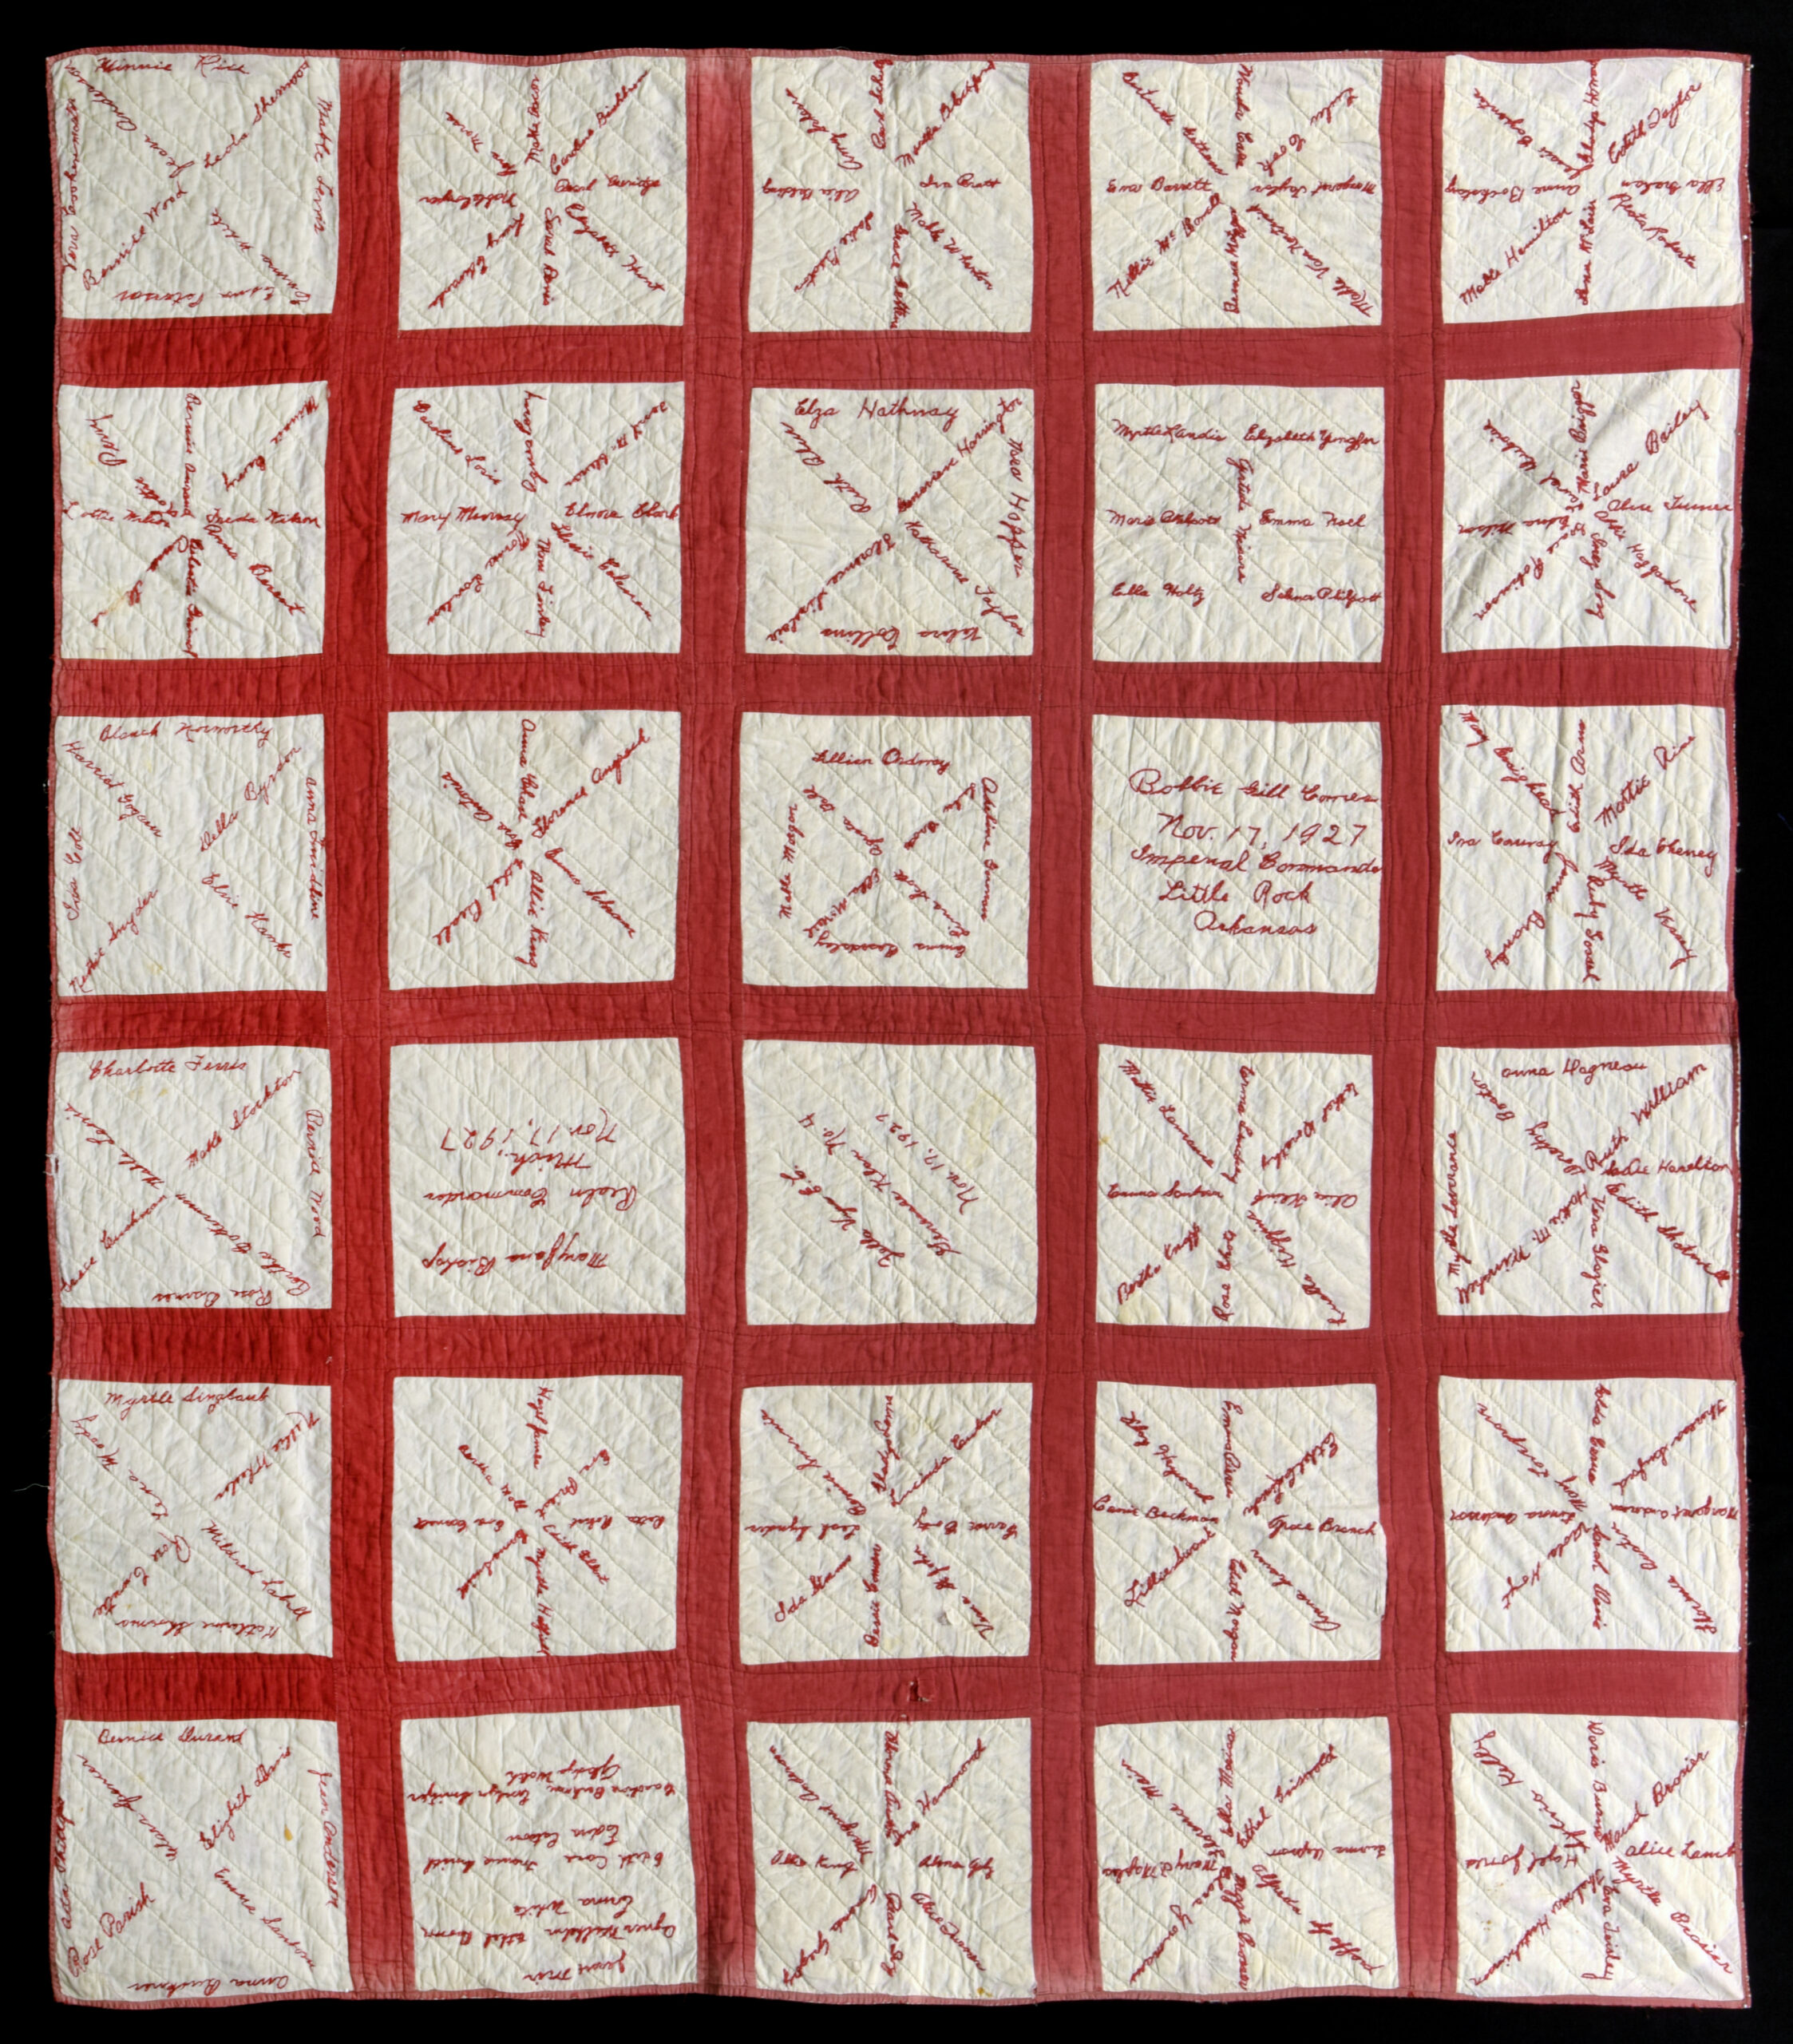 quilt composed of white squares with red embroidered names overlaid, enclosed by red borders